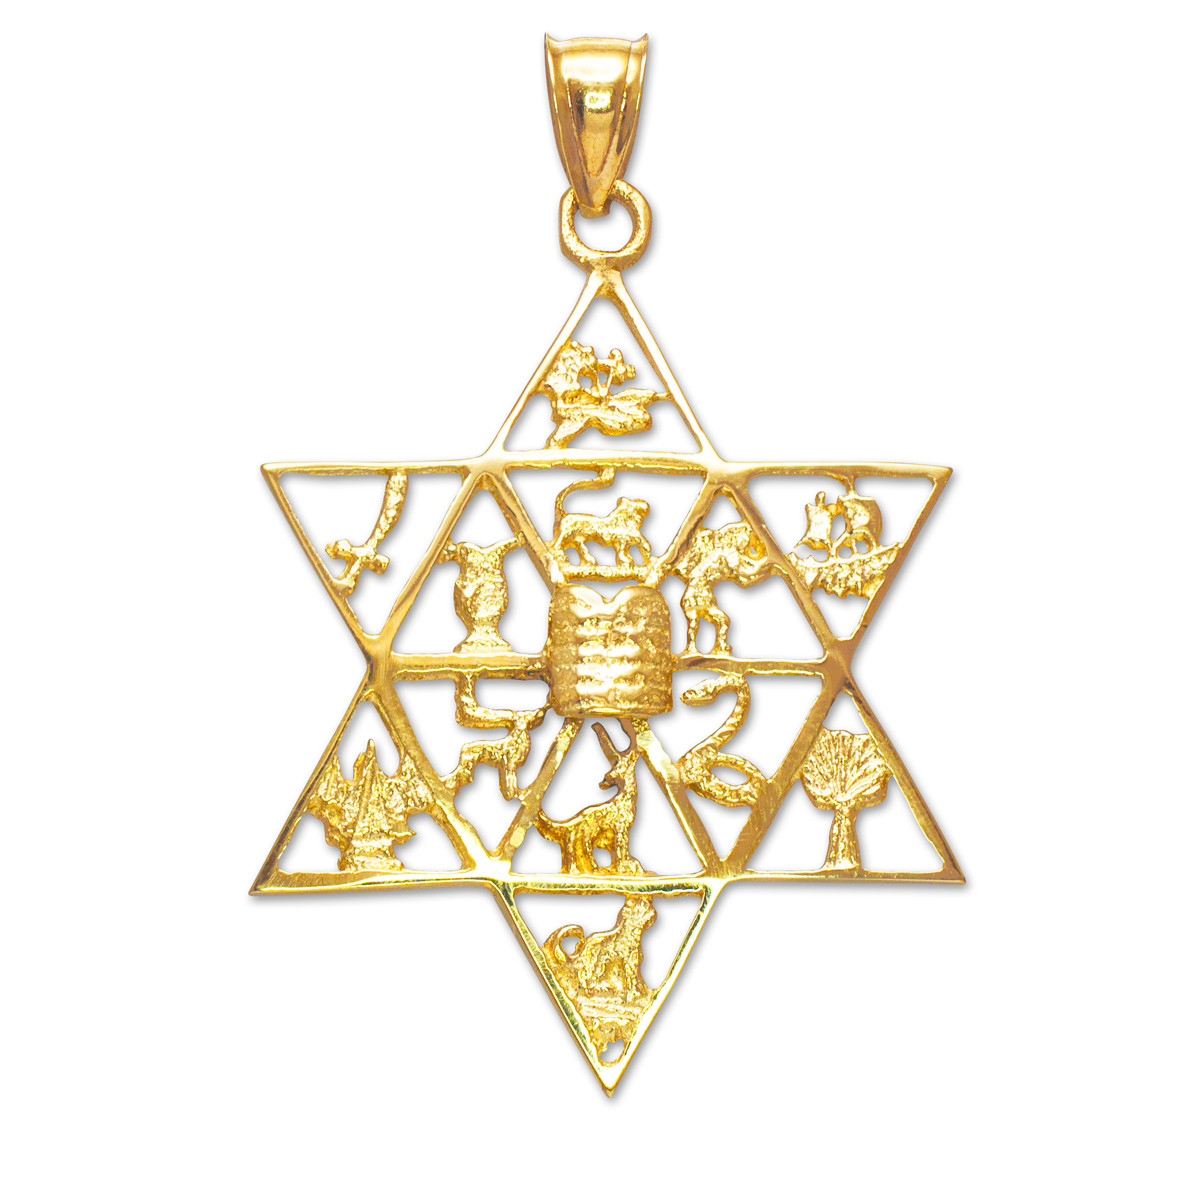 Details about Gold Star of David with Twelve Tribes of Israel Pendant